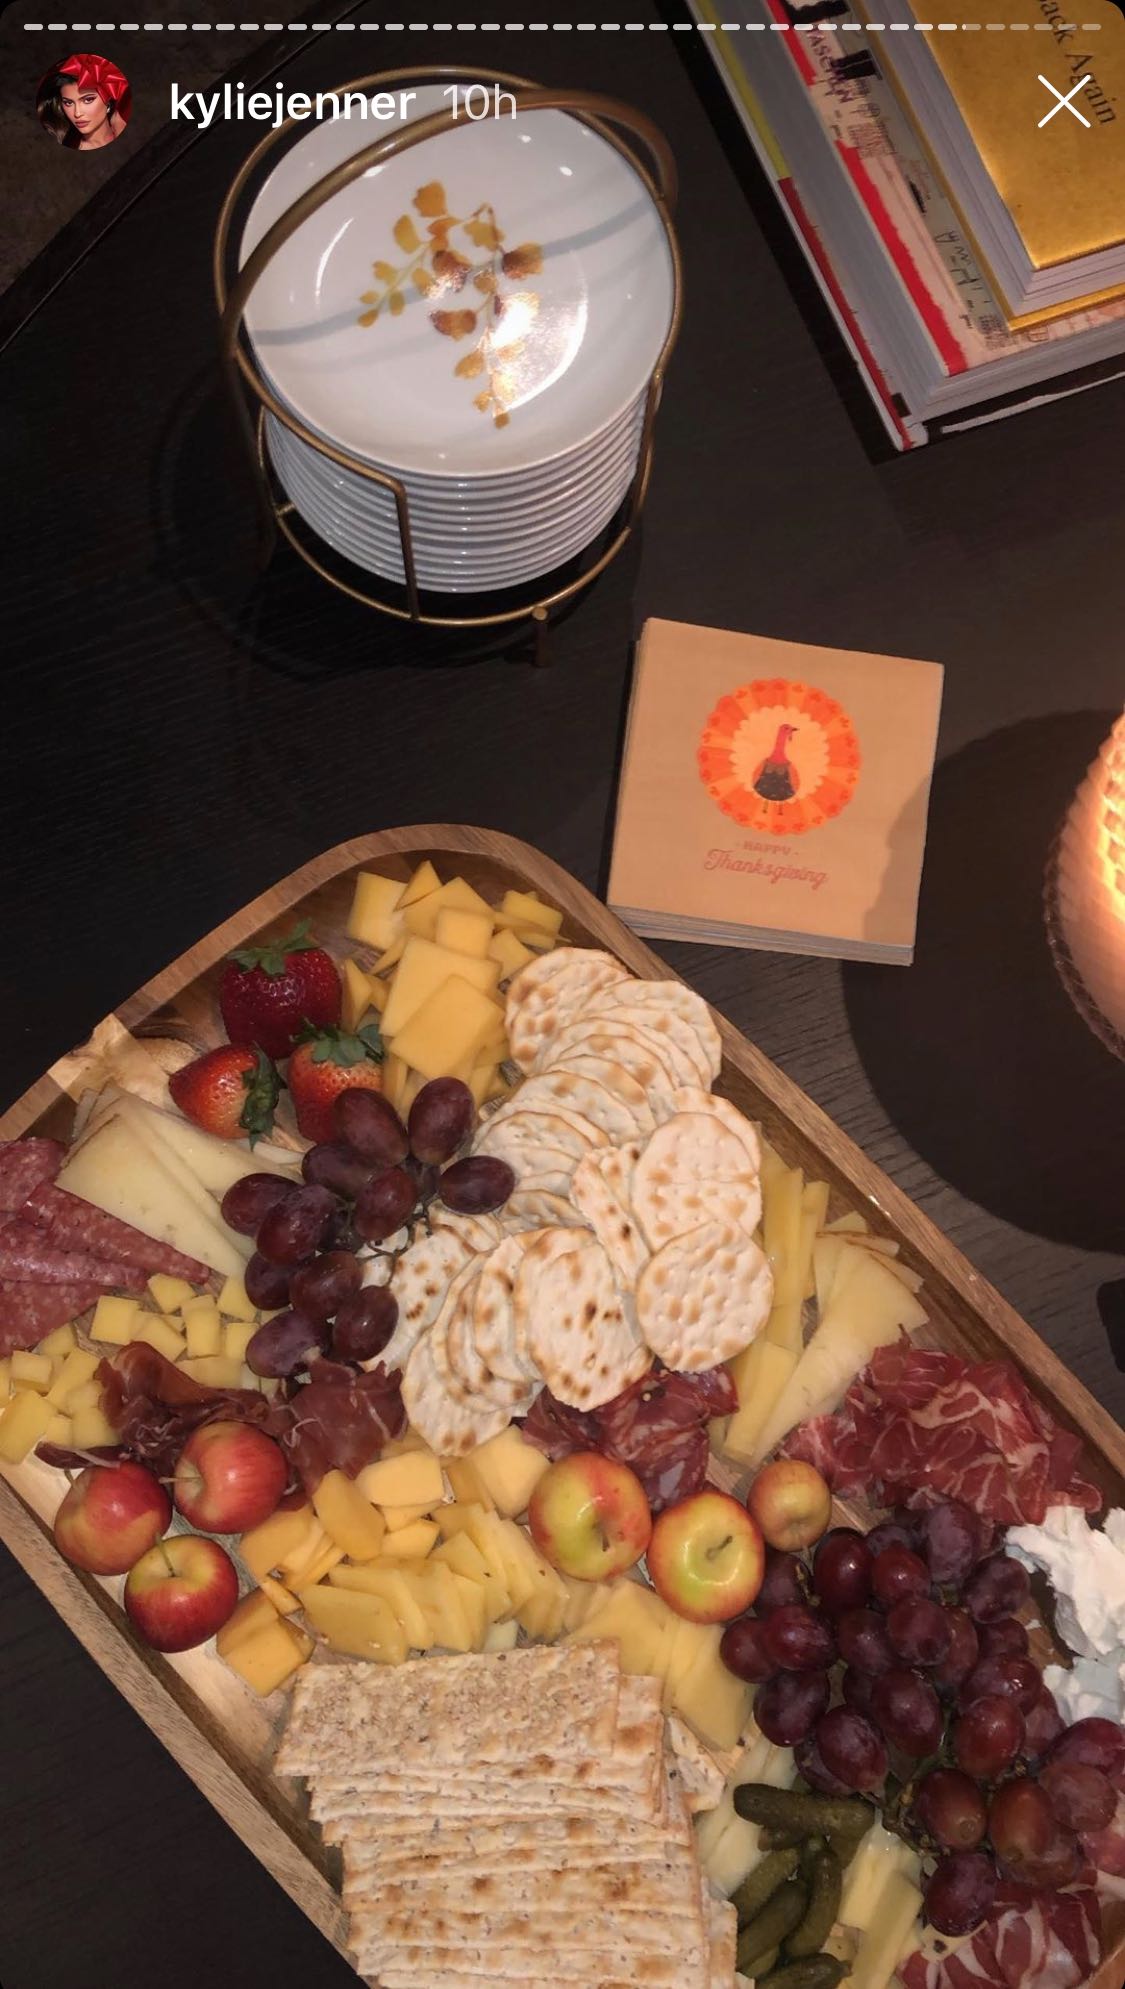 Kylie Jenner's luscious spread for her Friendship guests/ Source: Instagram/ KylieJenner